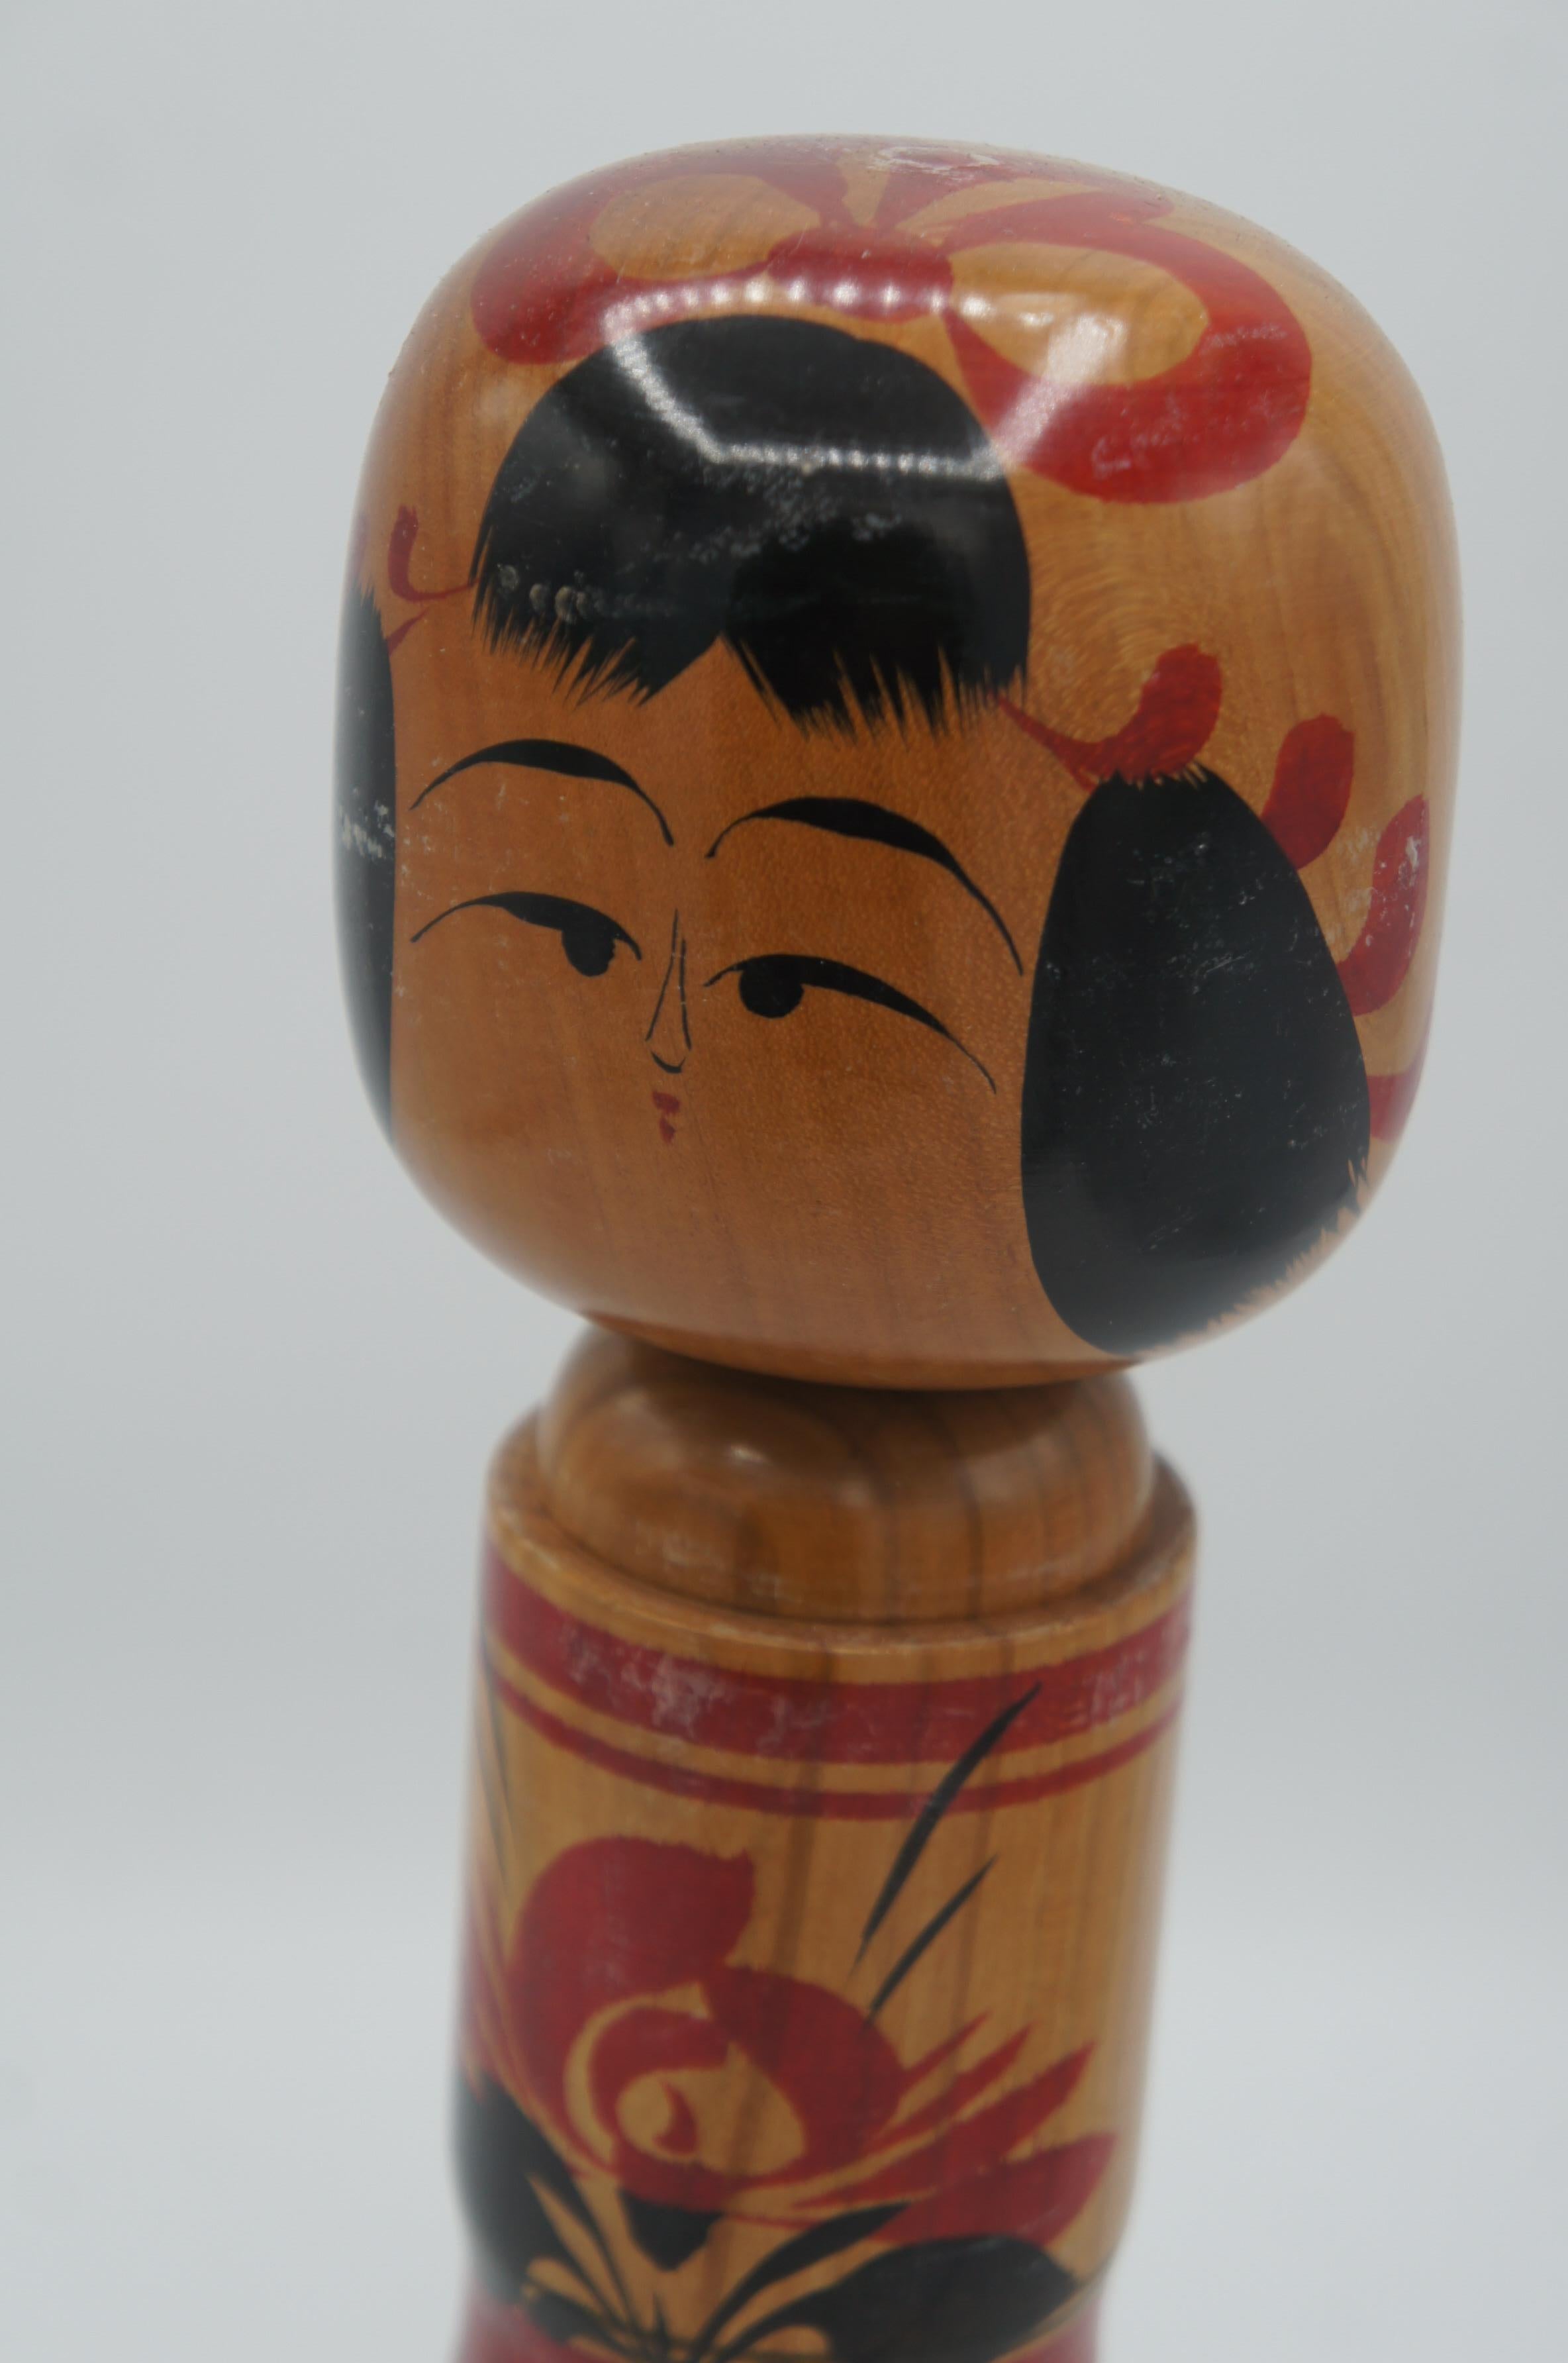 This is a wooden doll which called Kokeshi in Japanese.
It was made by Masayuki KAGANUMA who was born in 1936. This kokeshi doll was made in 1977.

Dimensions: 9 x 9 x H30 cm

Kokeshi are simple wooden Japanese dolls with no arms or legs that have